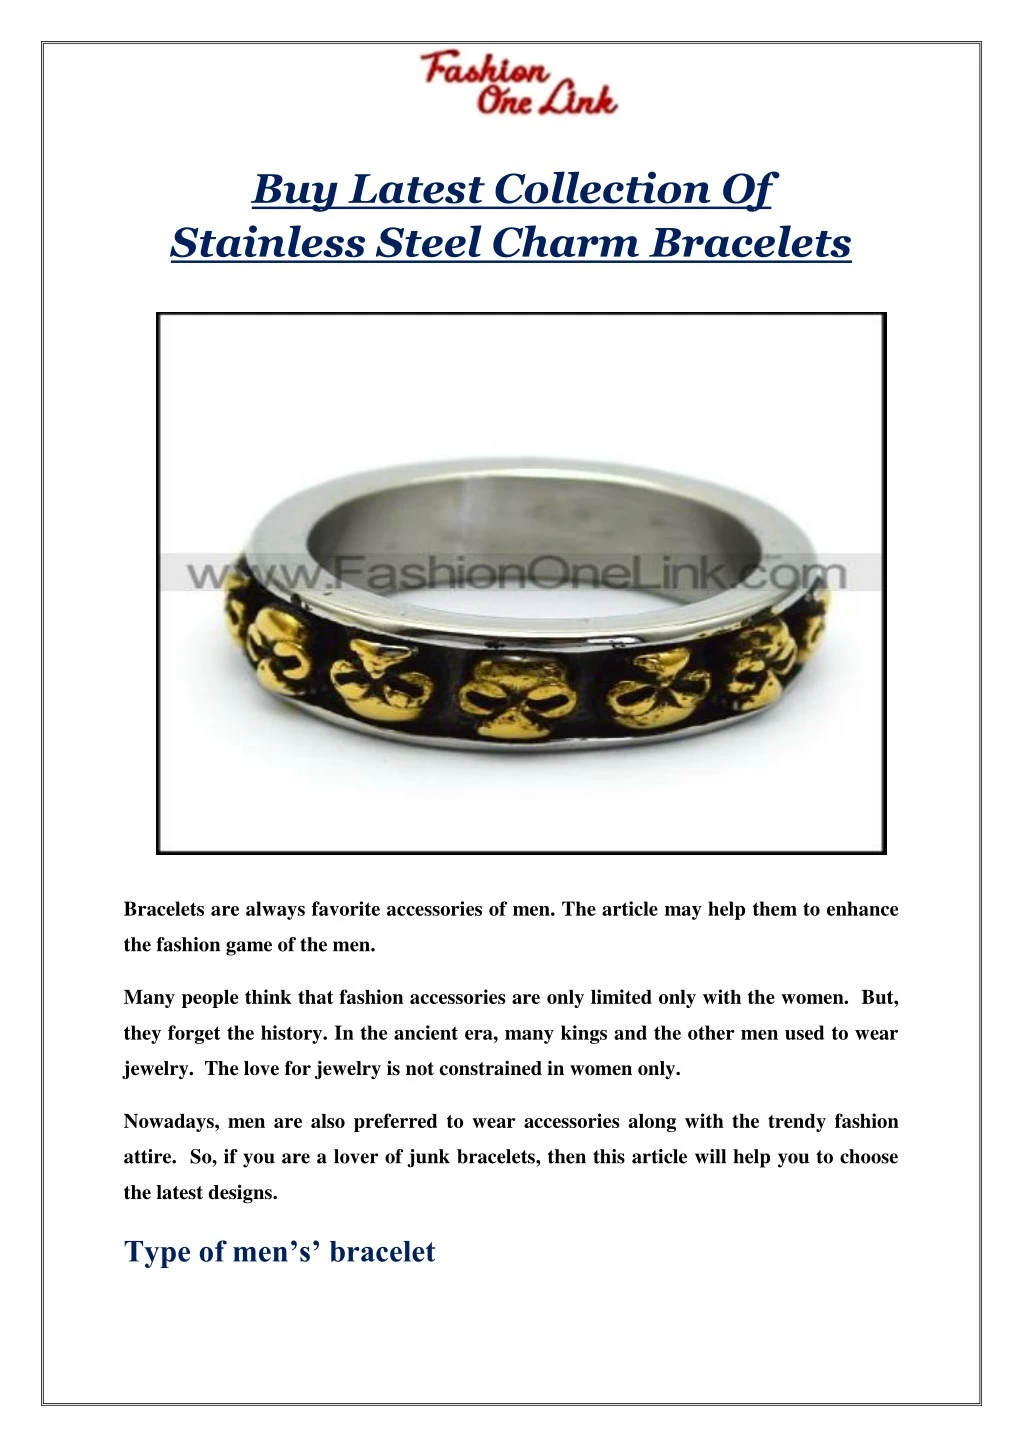 buy latest collection of stainless steel charm